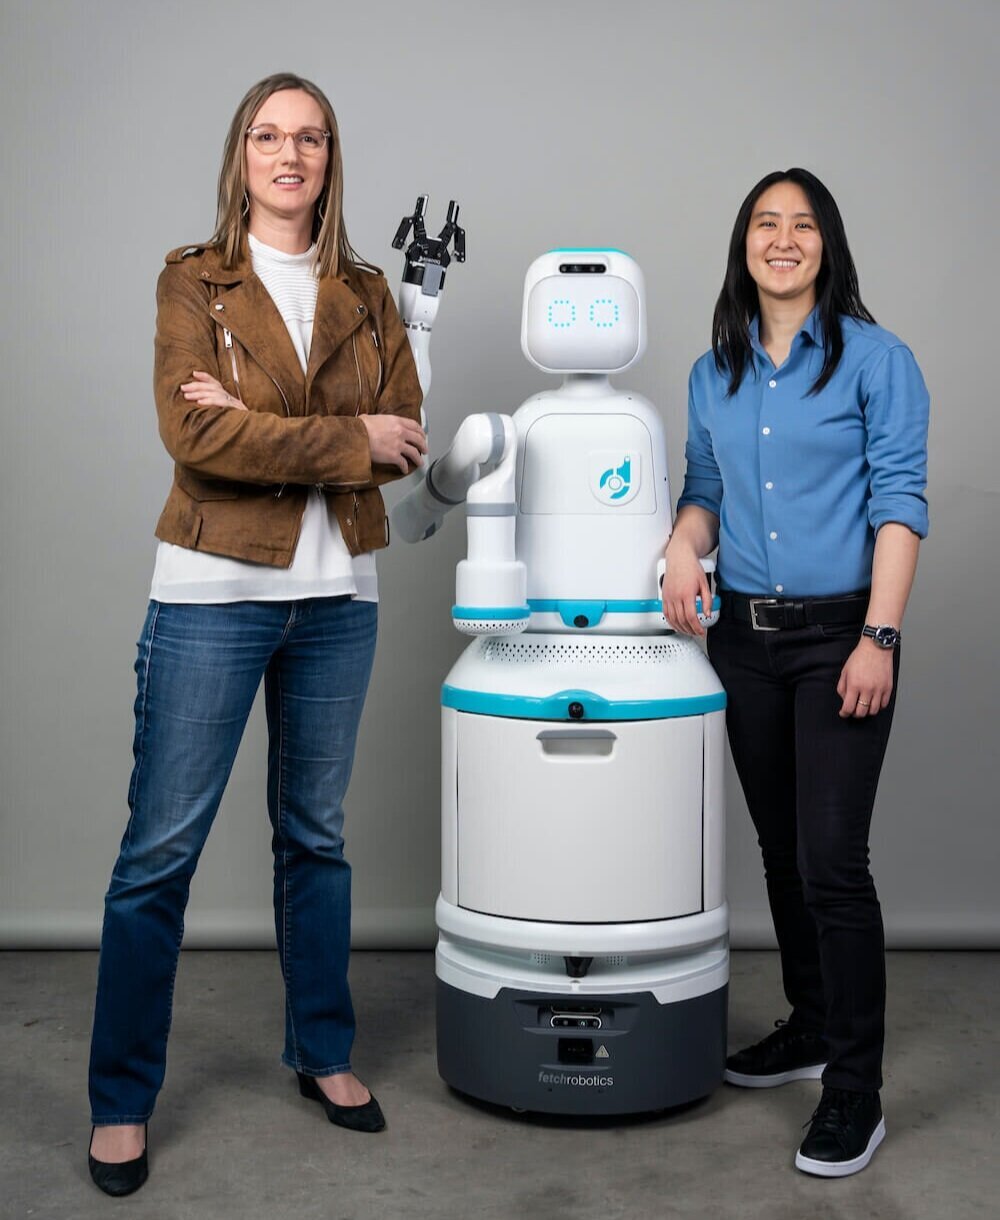 About Us - At Diligent Robotics, we build robots that help people. Founded by Andrea Thomaz and Vivian Chu, our team is composed of healthcare technology experts and engineers that have spent years studying and adapting automation technologies to hospital environments.